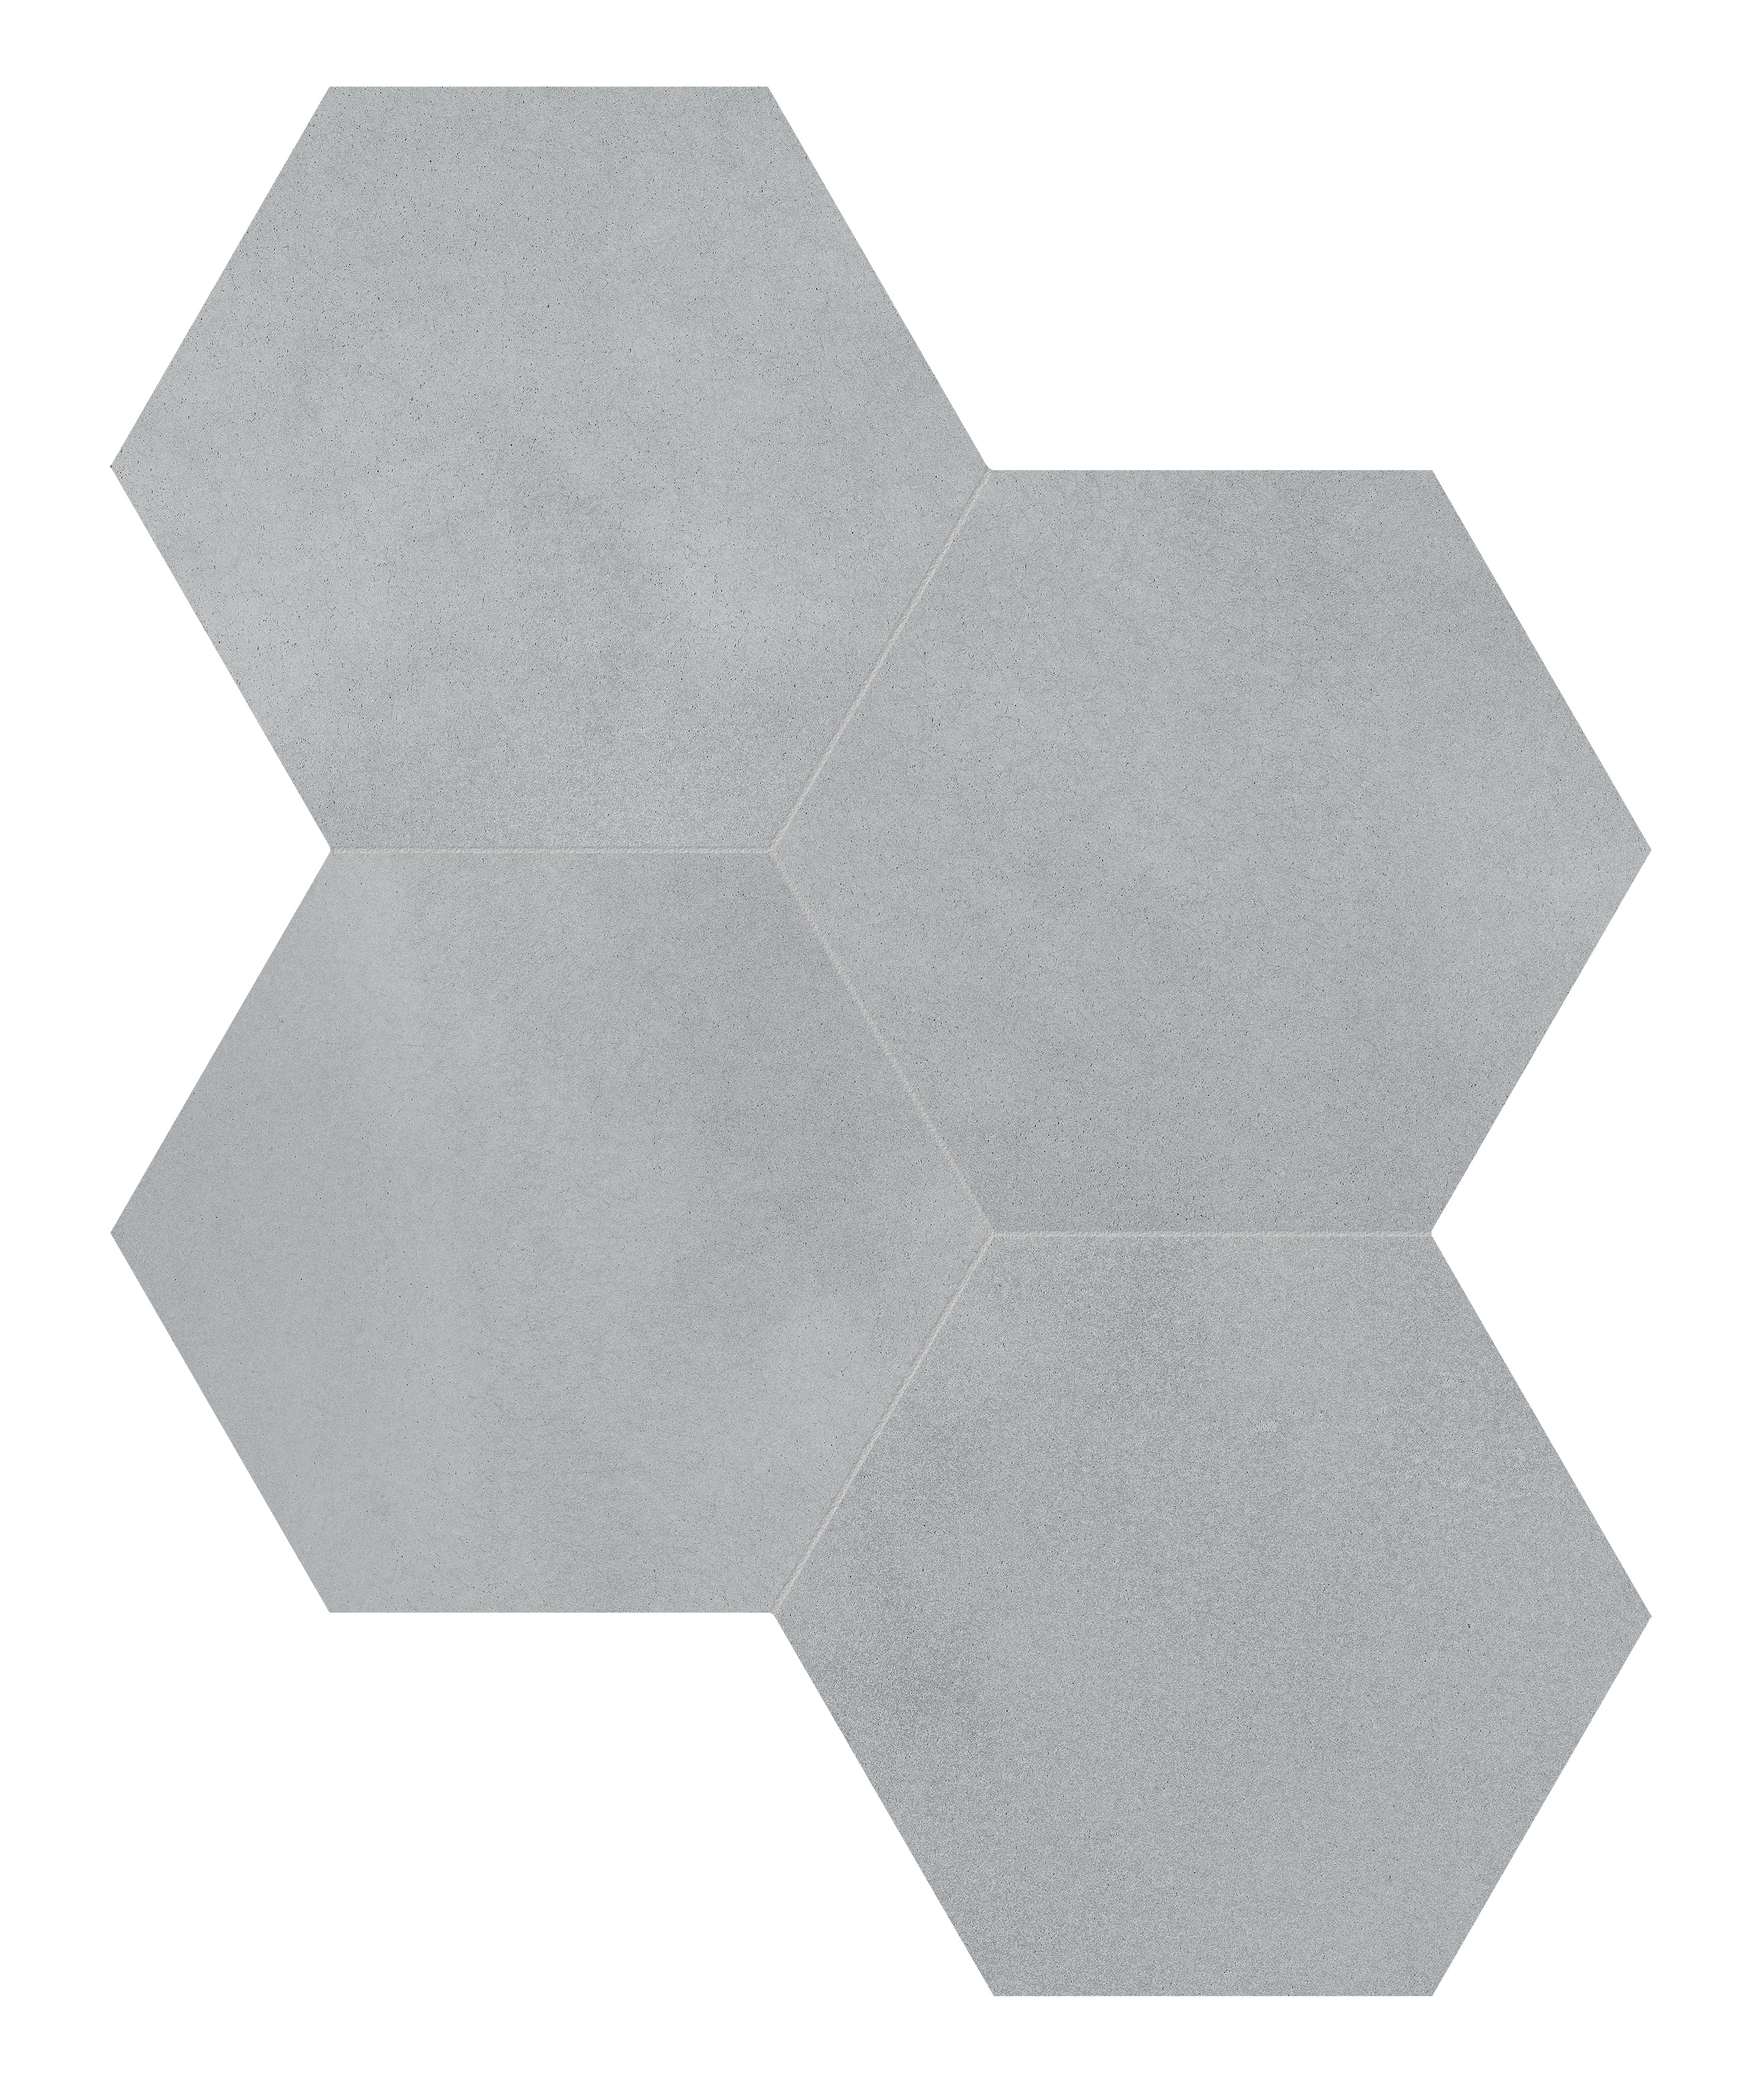 cashmere pattern glazed porcelain field tile from tapestri anatolia collection distributed by surface group international matte finish pressed edge 8&5 hexagon shape